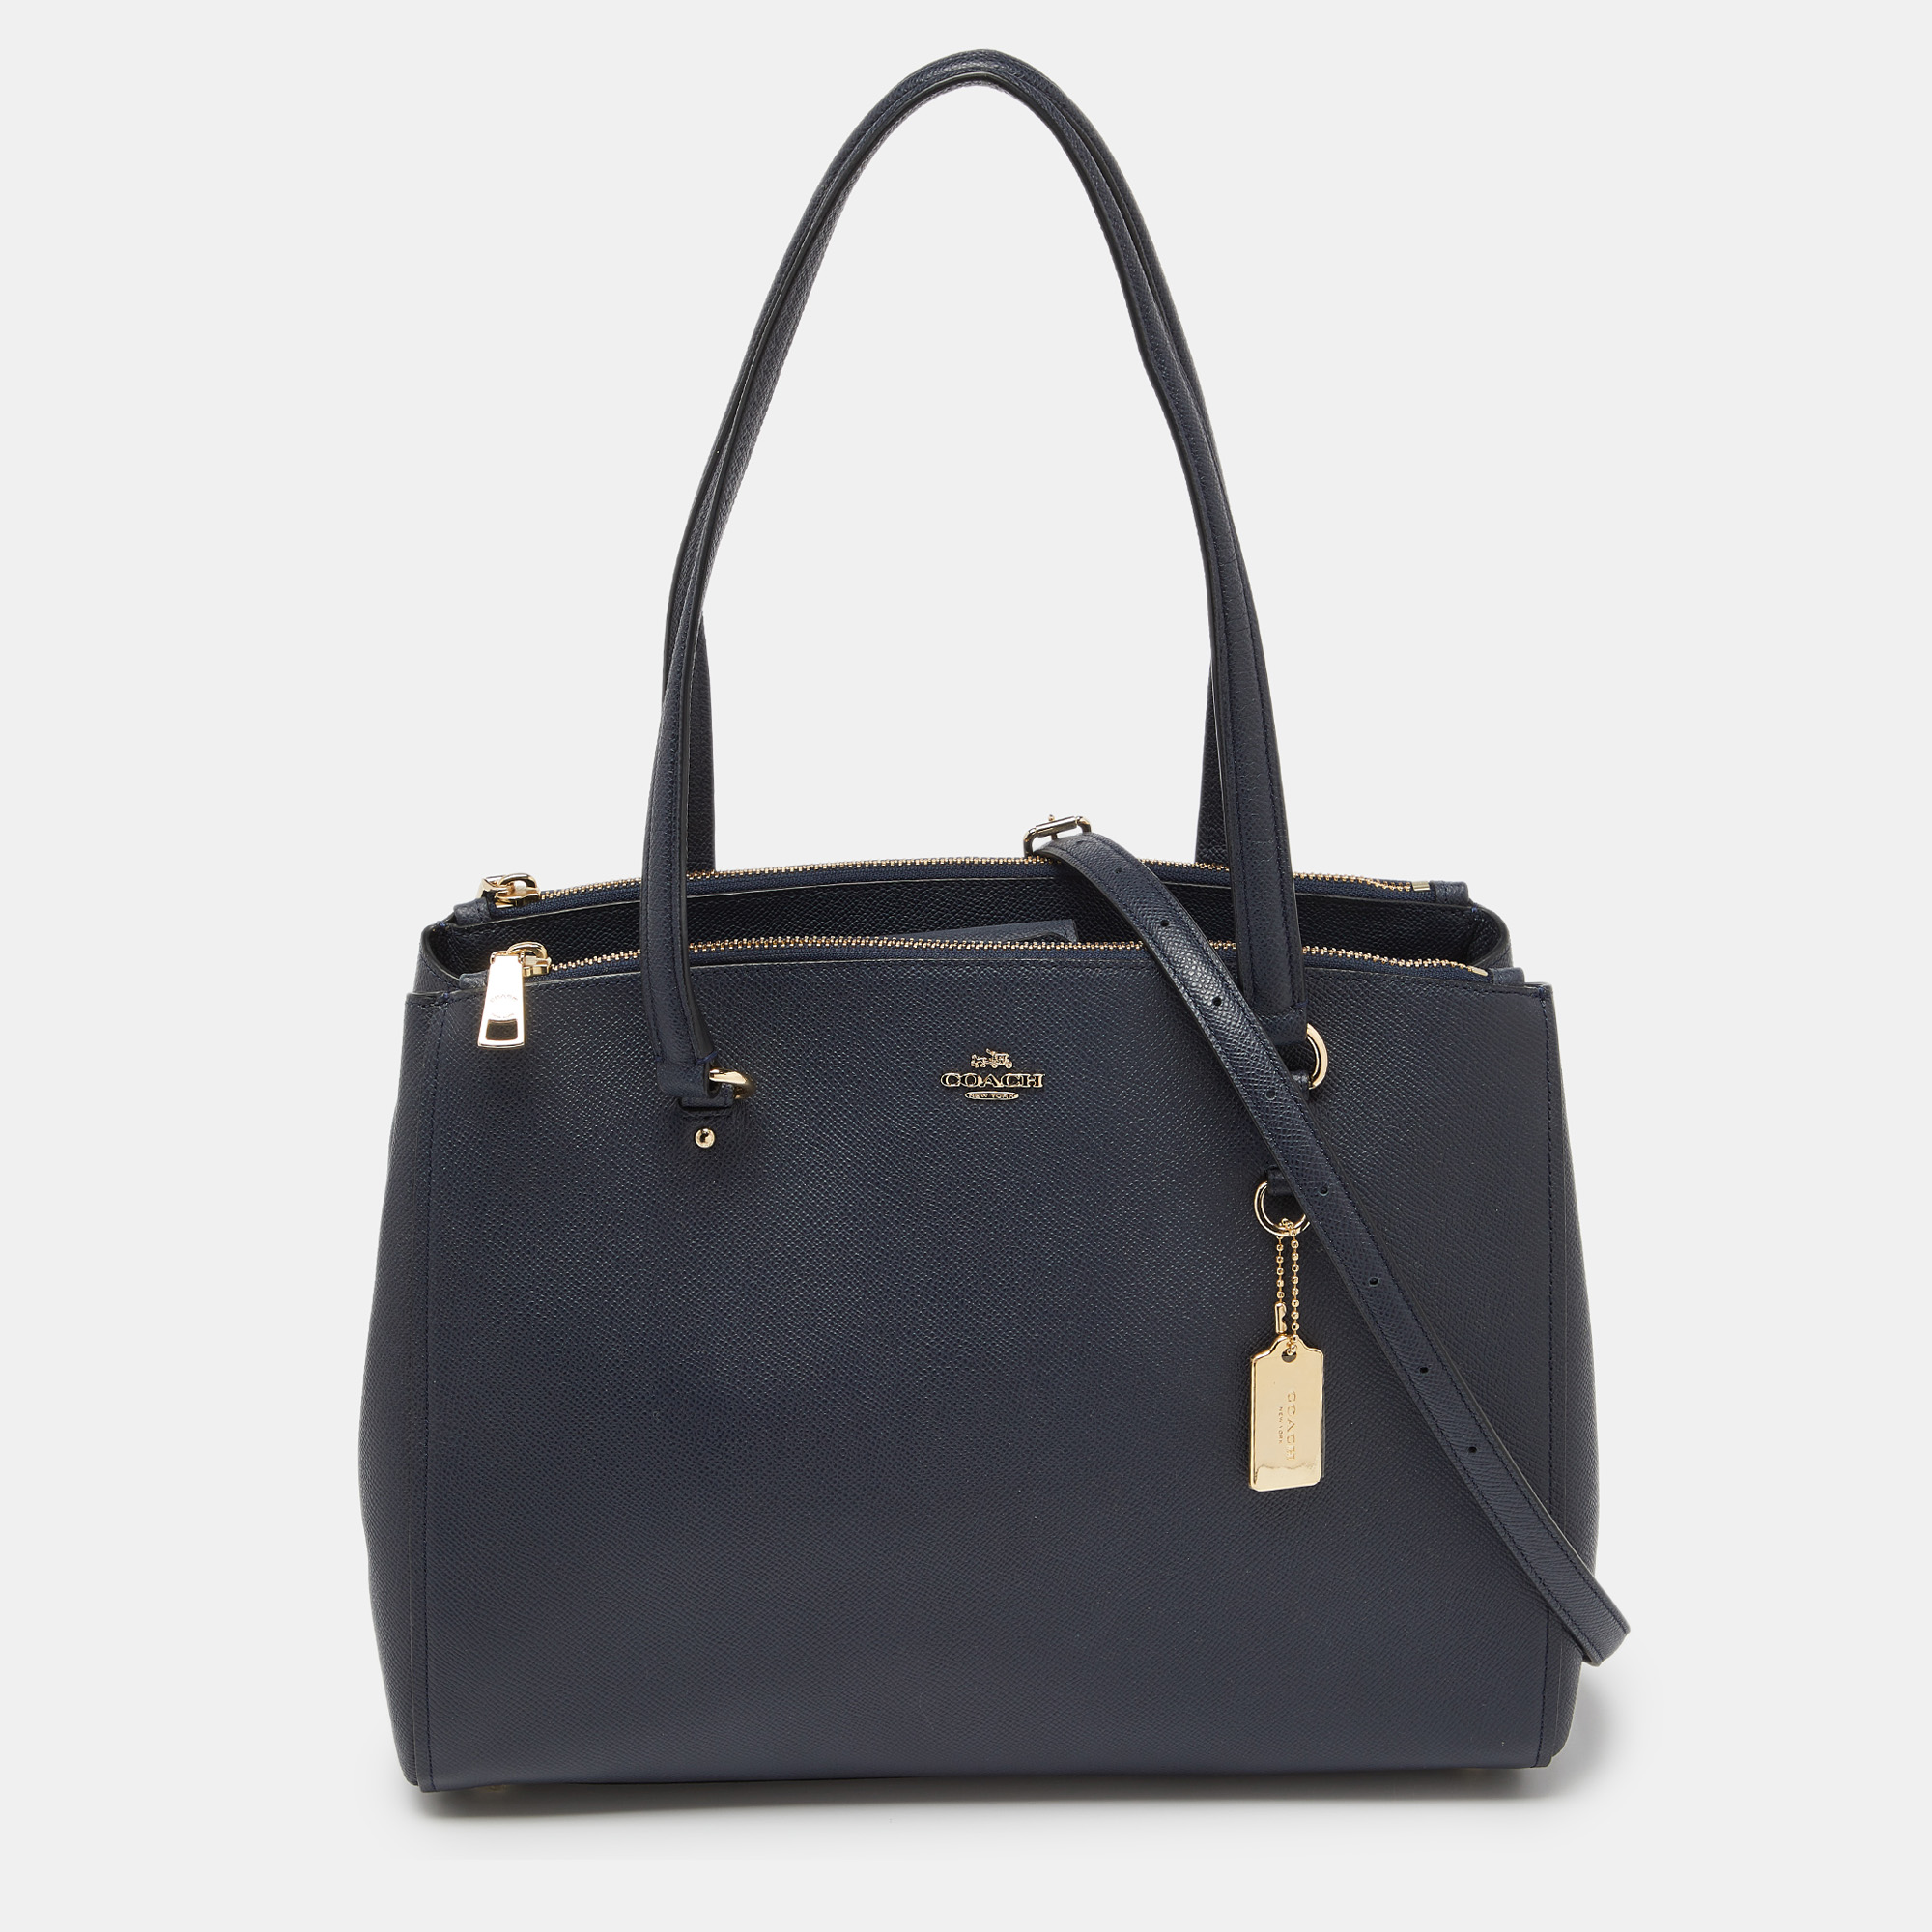 Coach navy blue leather stanton carryall tote